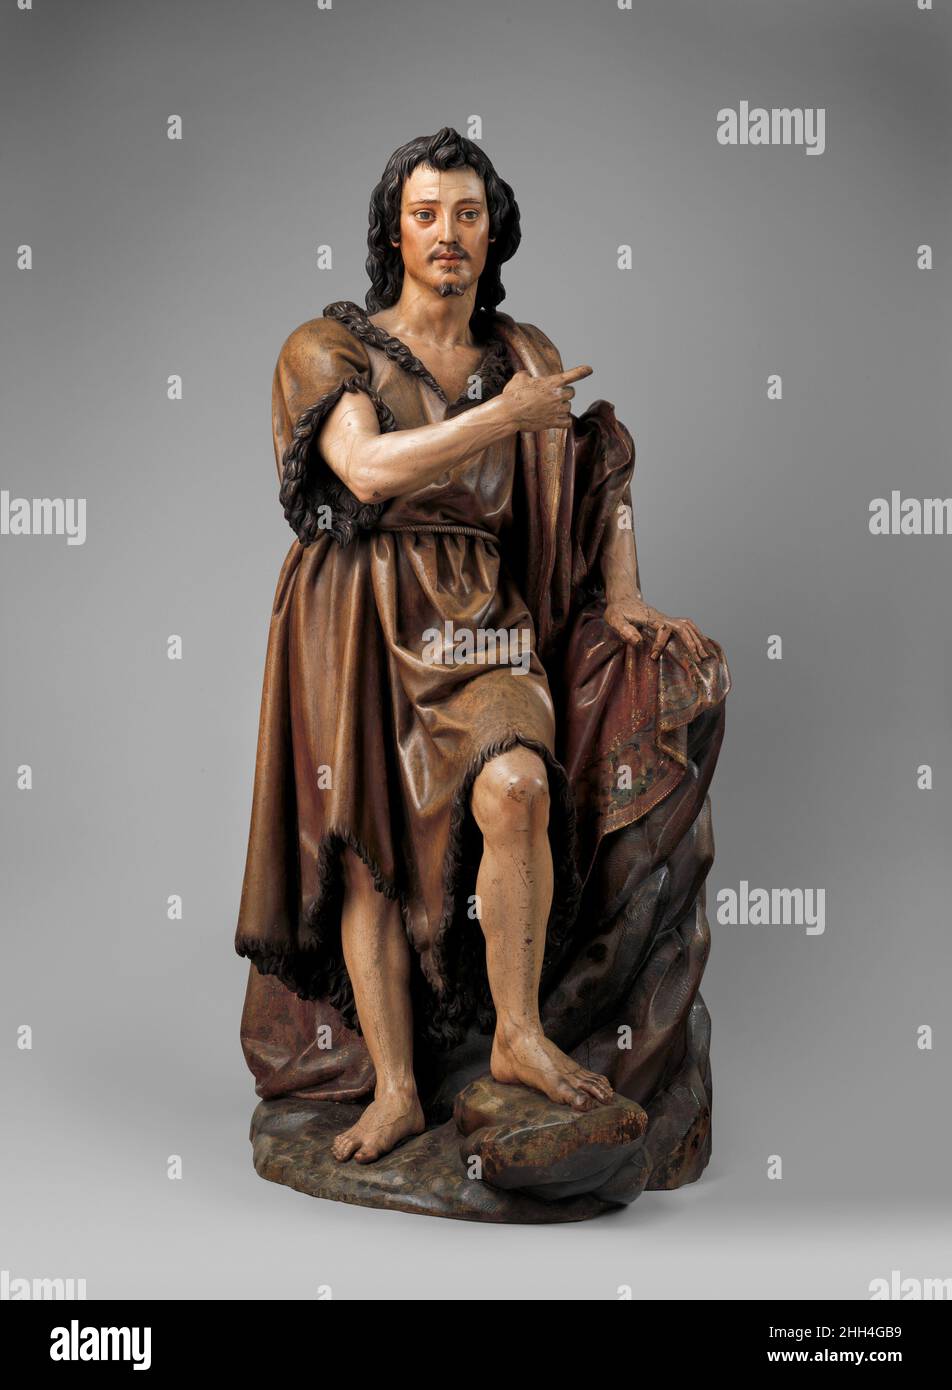 Saint John the Baptist ca. 1620–30 Juan Martínez Montañés Spanish Juan Martínez Montañés was one of the greatest spanish sculptors of the first half of the seventeenth century. Based in Seville, he carved numerous wooden statues and reliefs that were painted and integrated into large altar screens called retablos (English: retables) for churches in his native region or to be shipped to the New World. His forte as an artist was the single figure, standing or seated, usually robust, naturally posed, and richly robed. Somewhat defensively, he gave his reason for this: 'As for the appearance of th Stock Photo